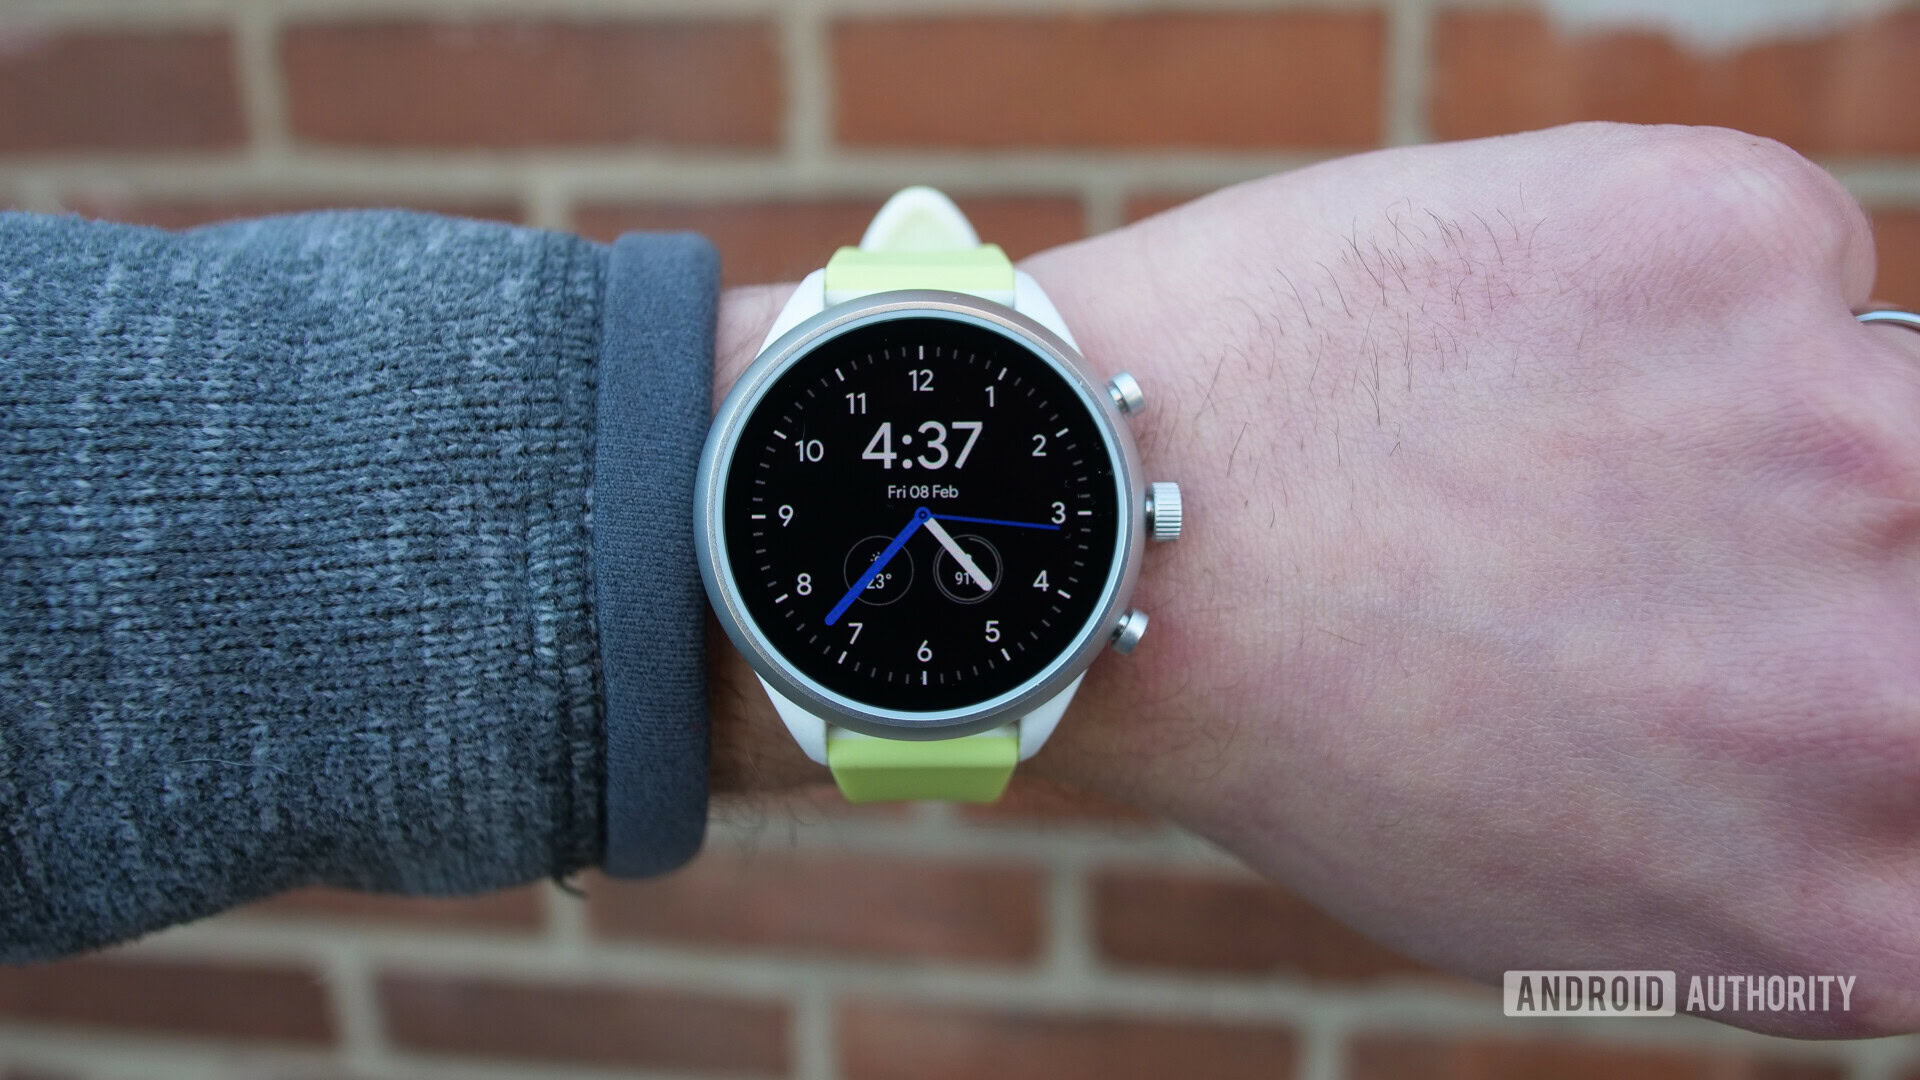 Fossil Sport review: The best Wear OS watch, not the best fitness watch